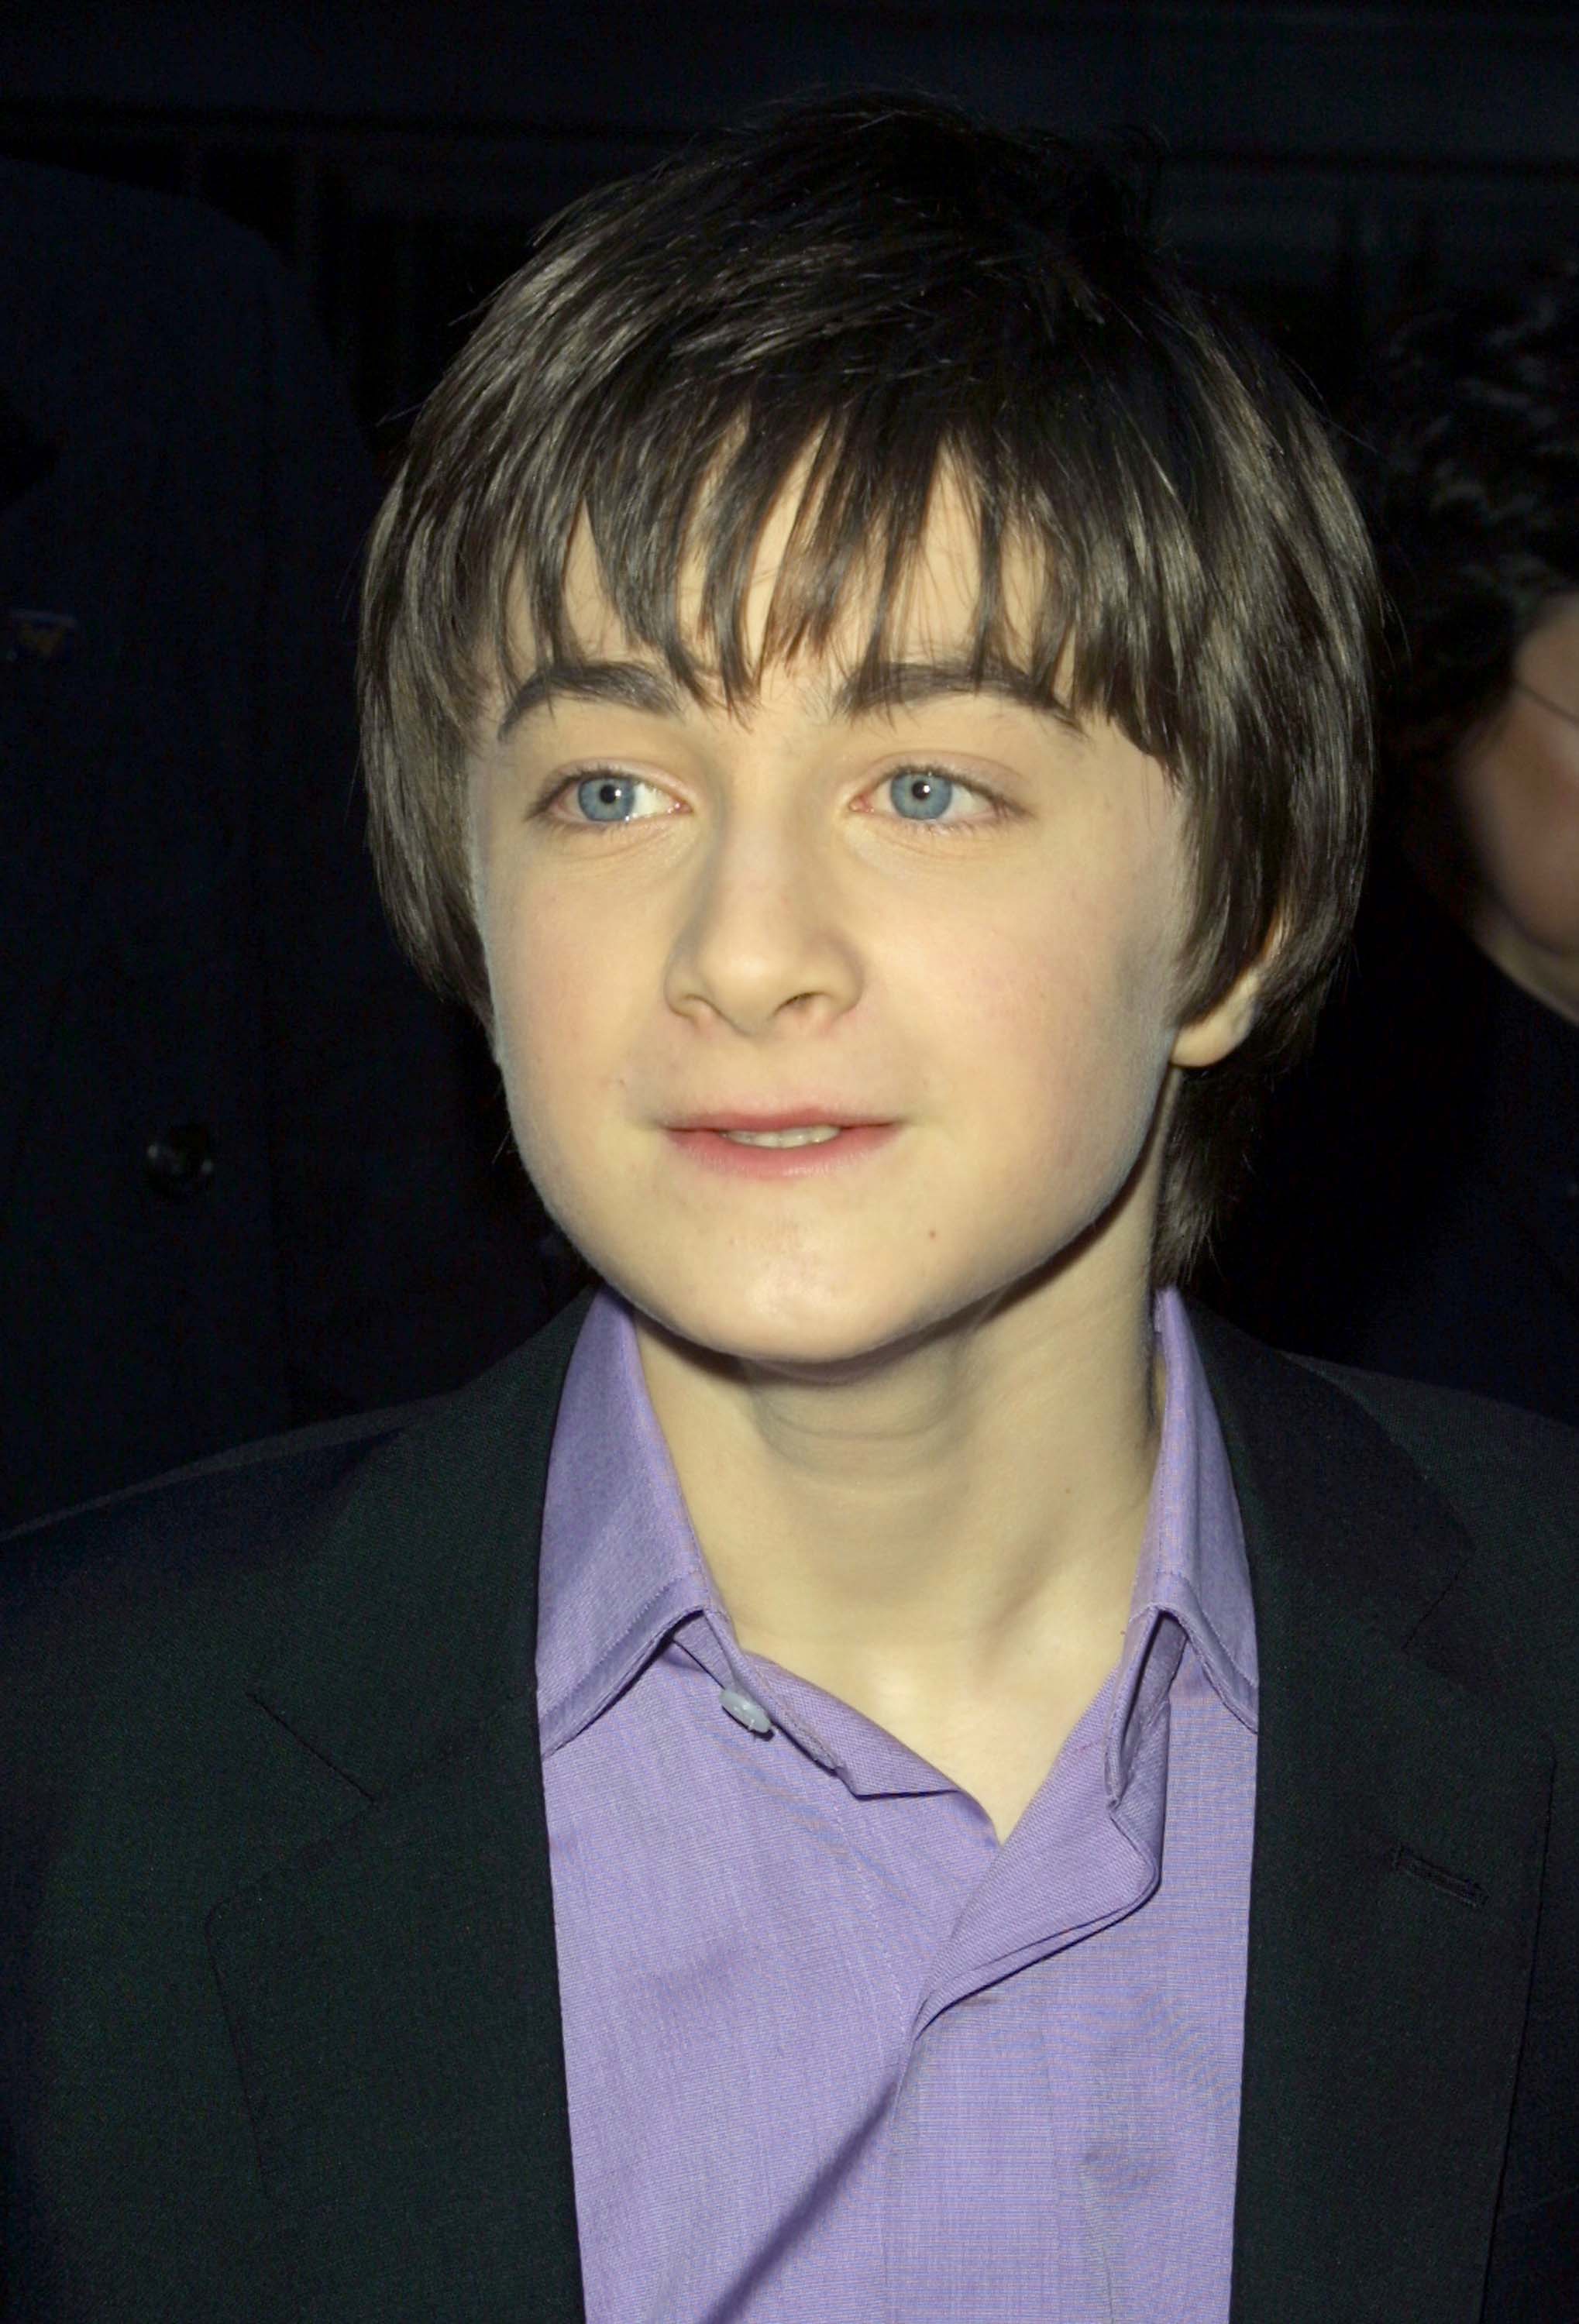 The boy at the "Harry Potter and The Sorcerer's Stone" premiere in New York City on November 11, 2001 | Source: Getty Images